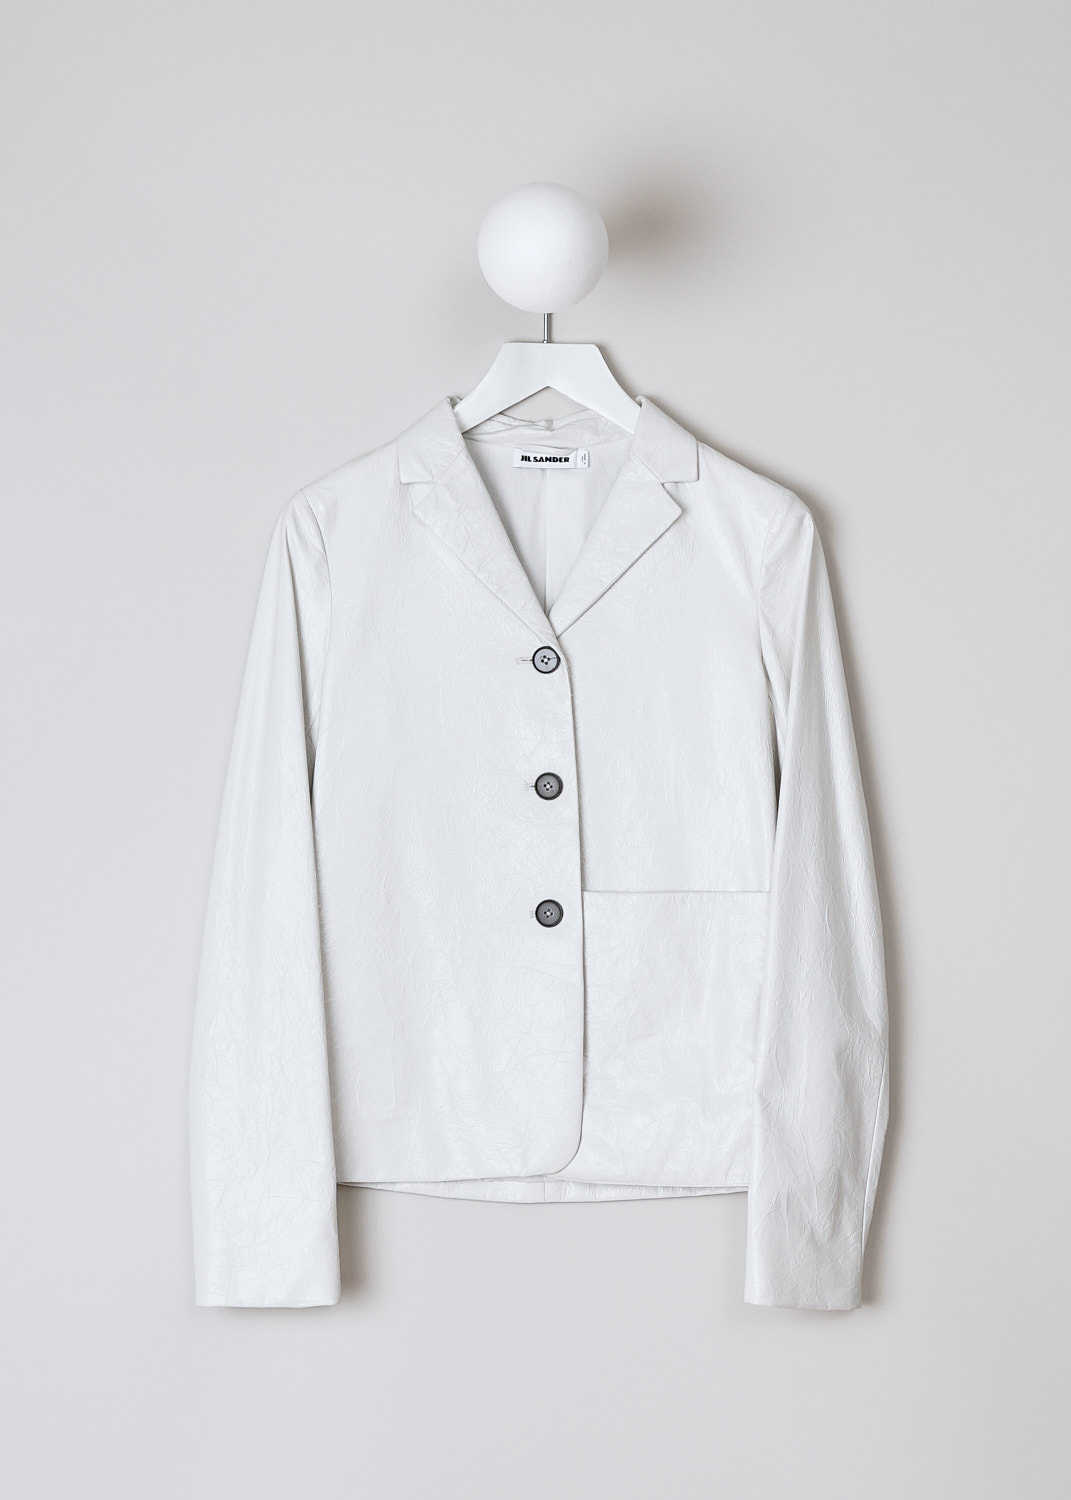 JIL SANDER, CROPPED WHITE CRACKLED LEATHER JACKET, JSPN651570_WNL00080_105, White, Front, This cropped jacket is made of a crackled white leather. The jacket has a notched lapel and a front button closure with black buttons. In the front, the jacket has a single patch pocket to one side. The jacket has a straight hemline. 

